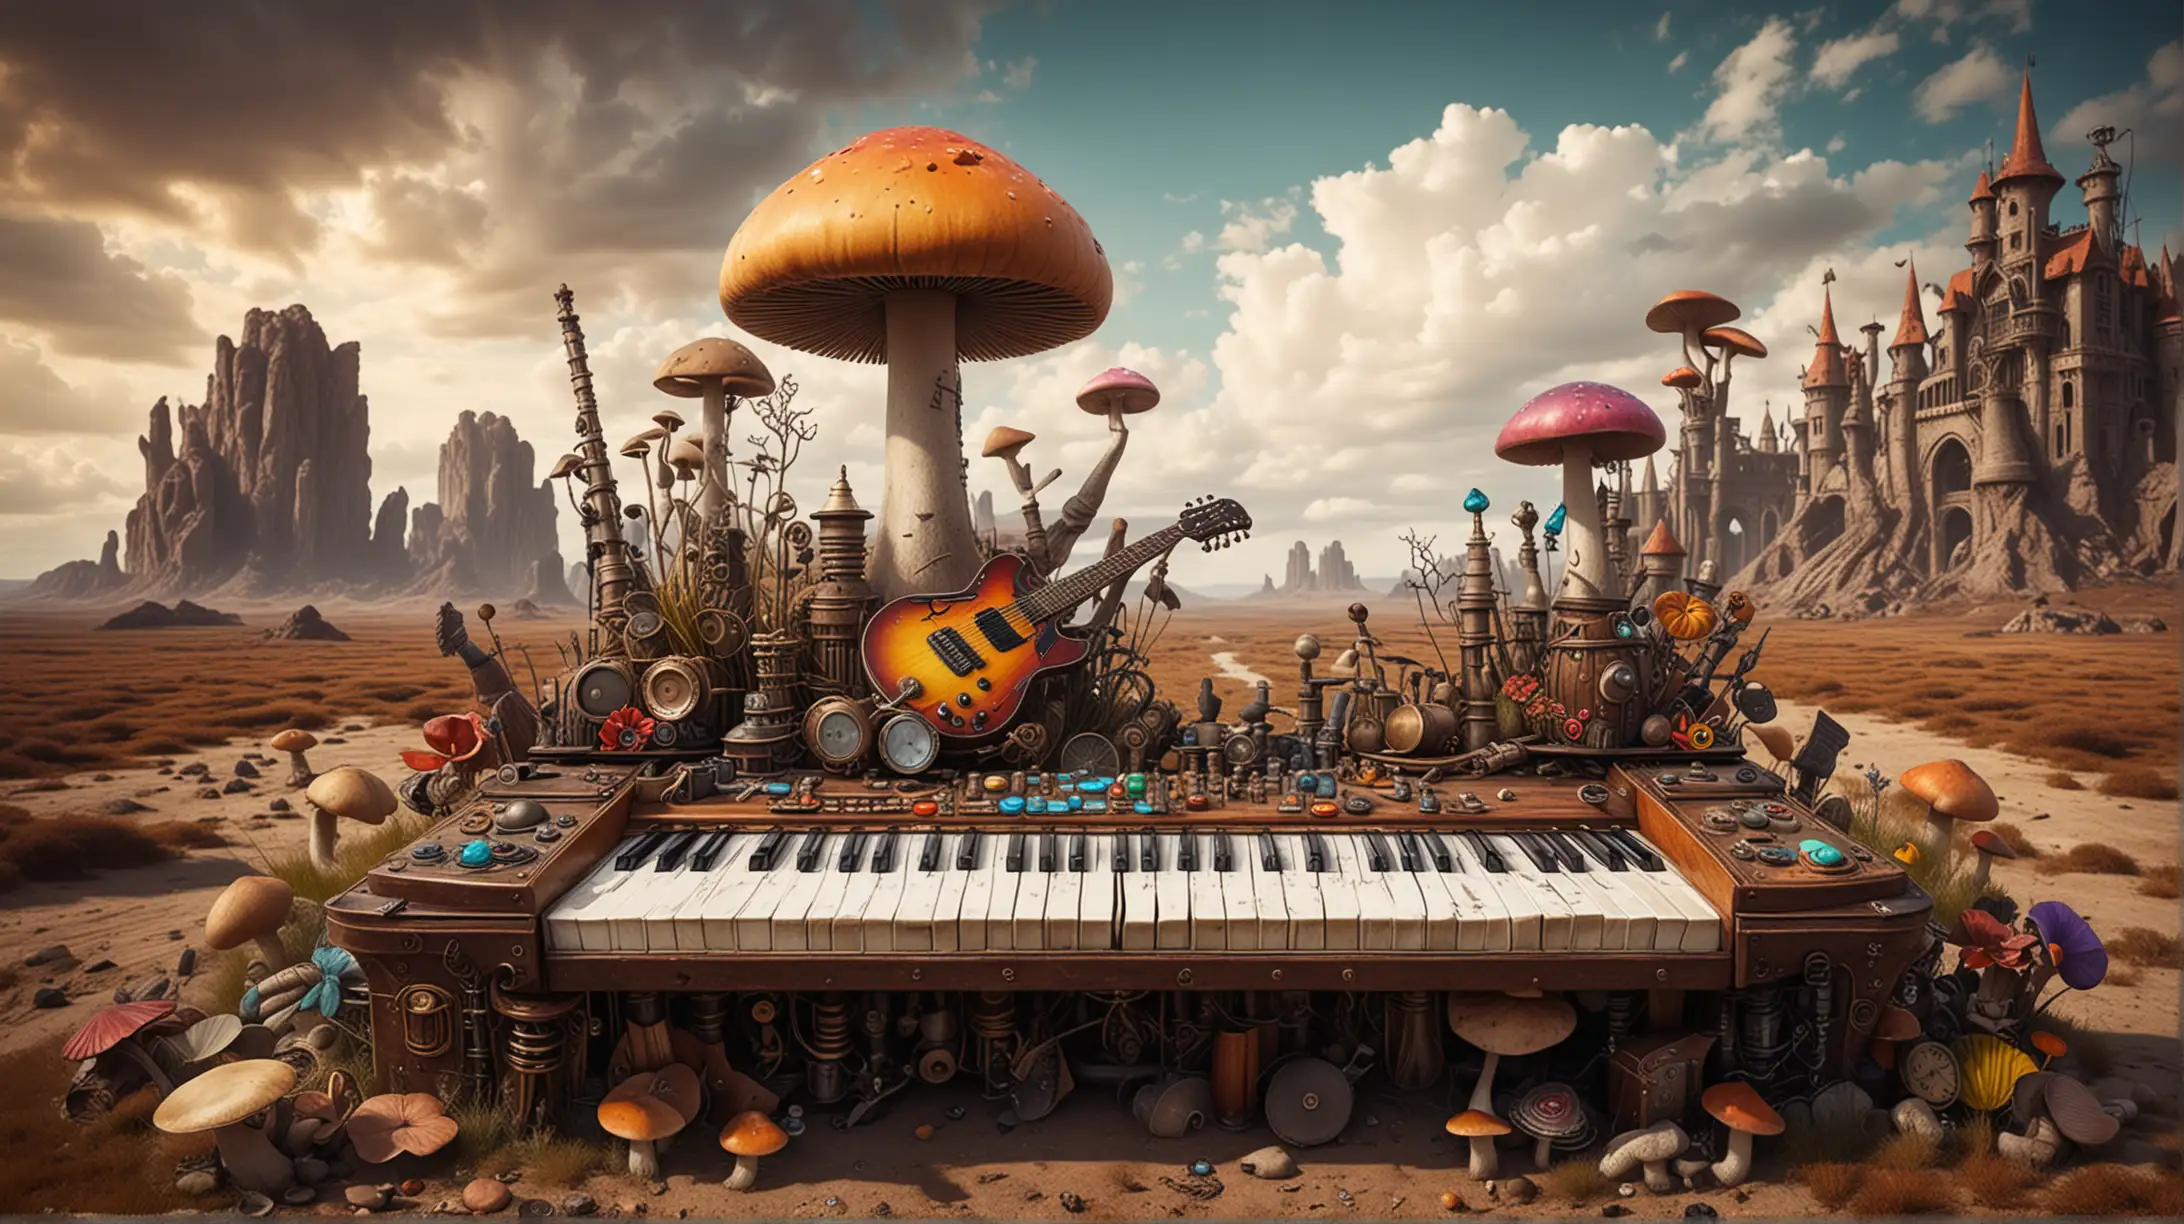 funky colorful steampunk gothic landscape with one guitar mushroom drums keyboard